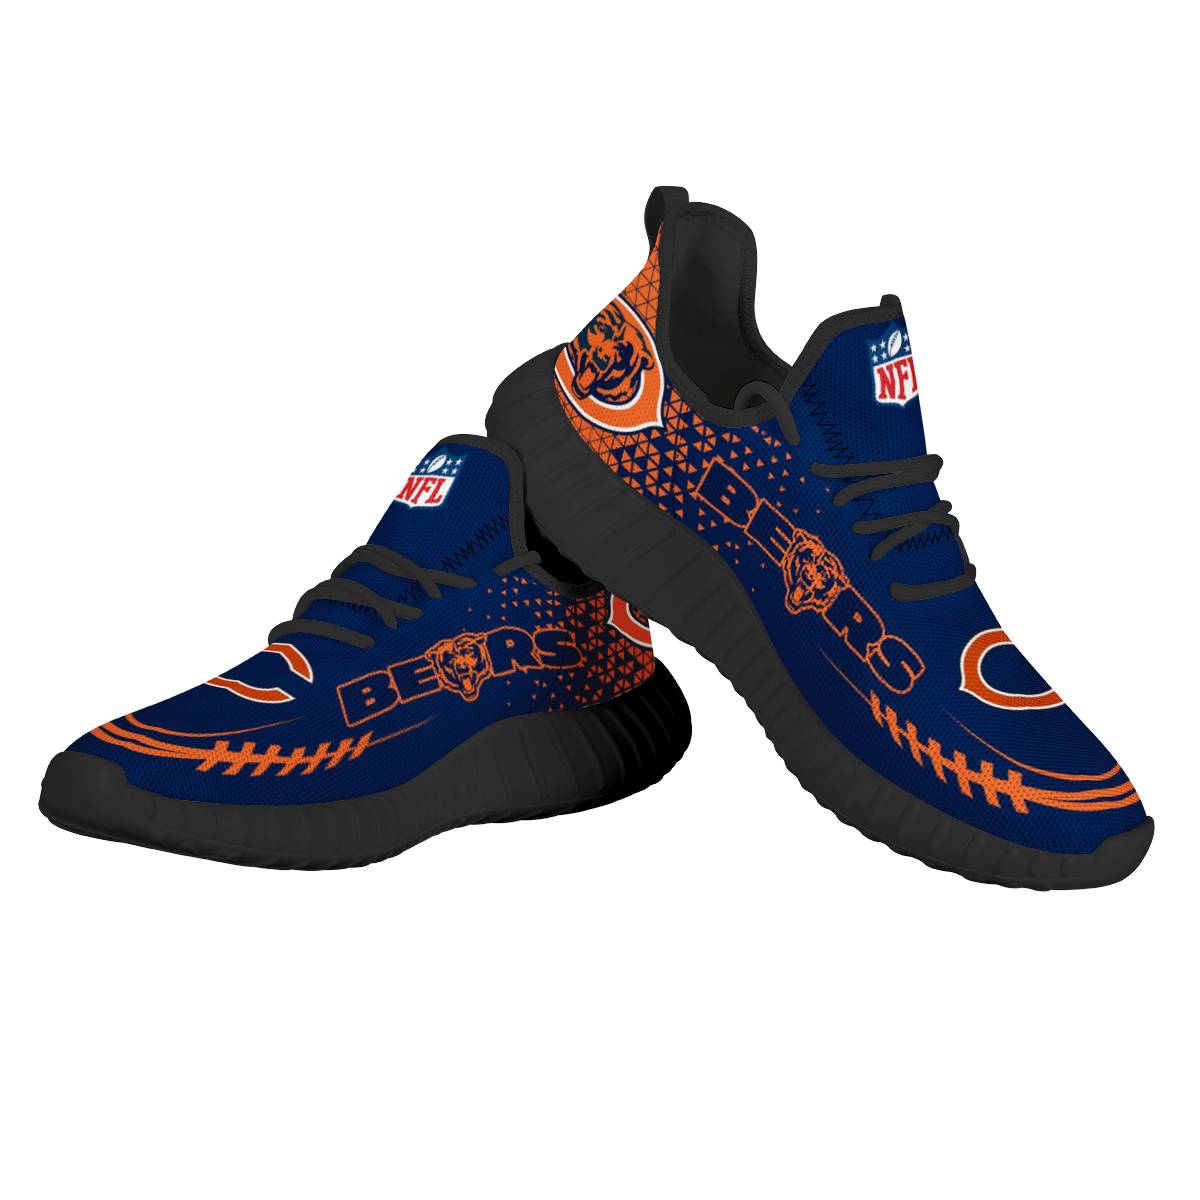 Women's NFL Chicago Bears Mesh Knit Sneakers/Shoes 006